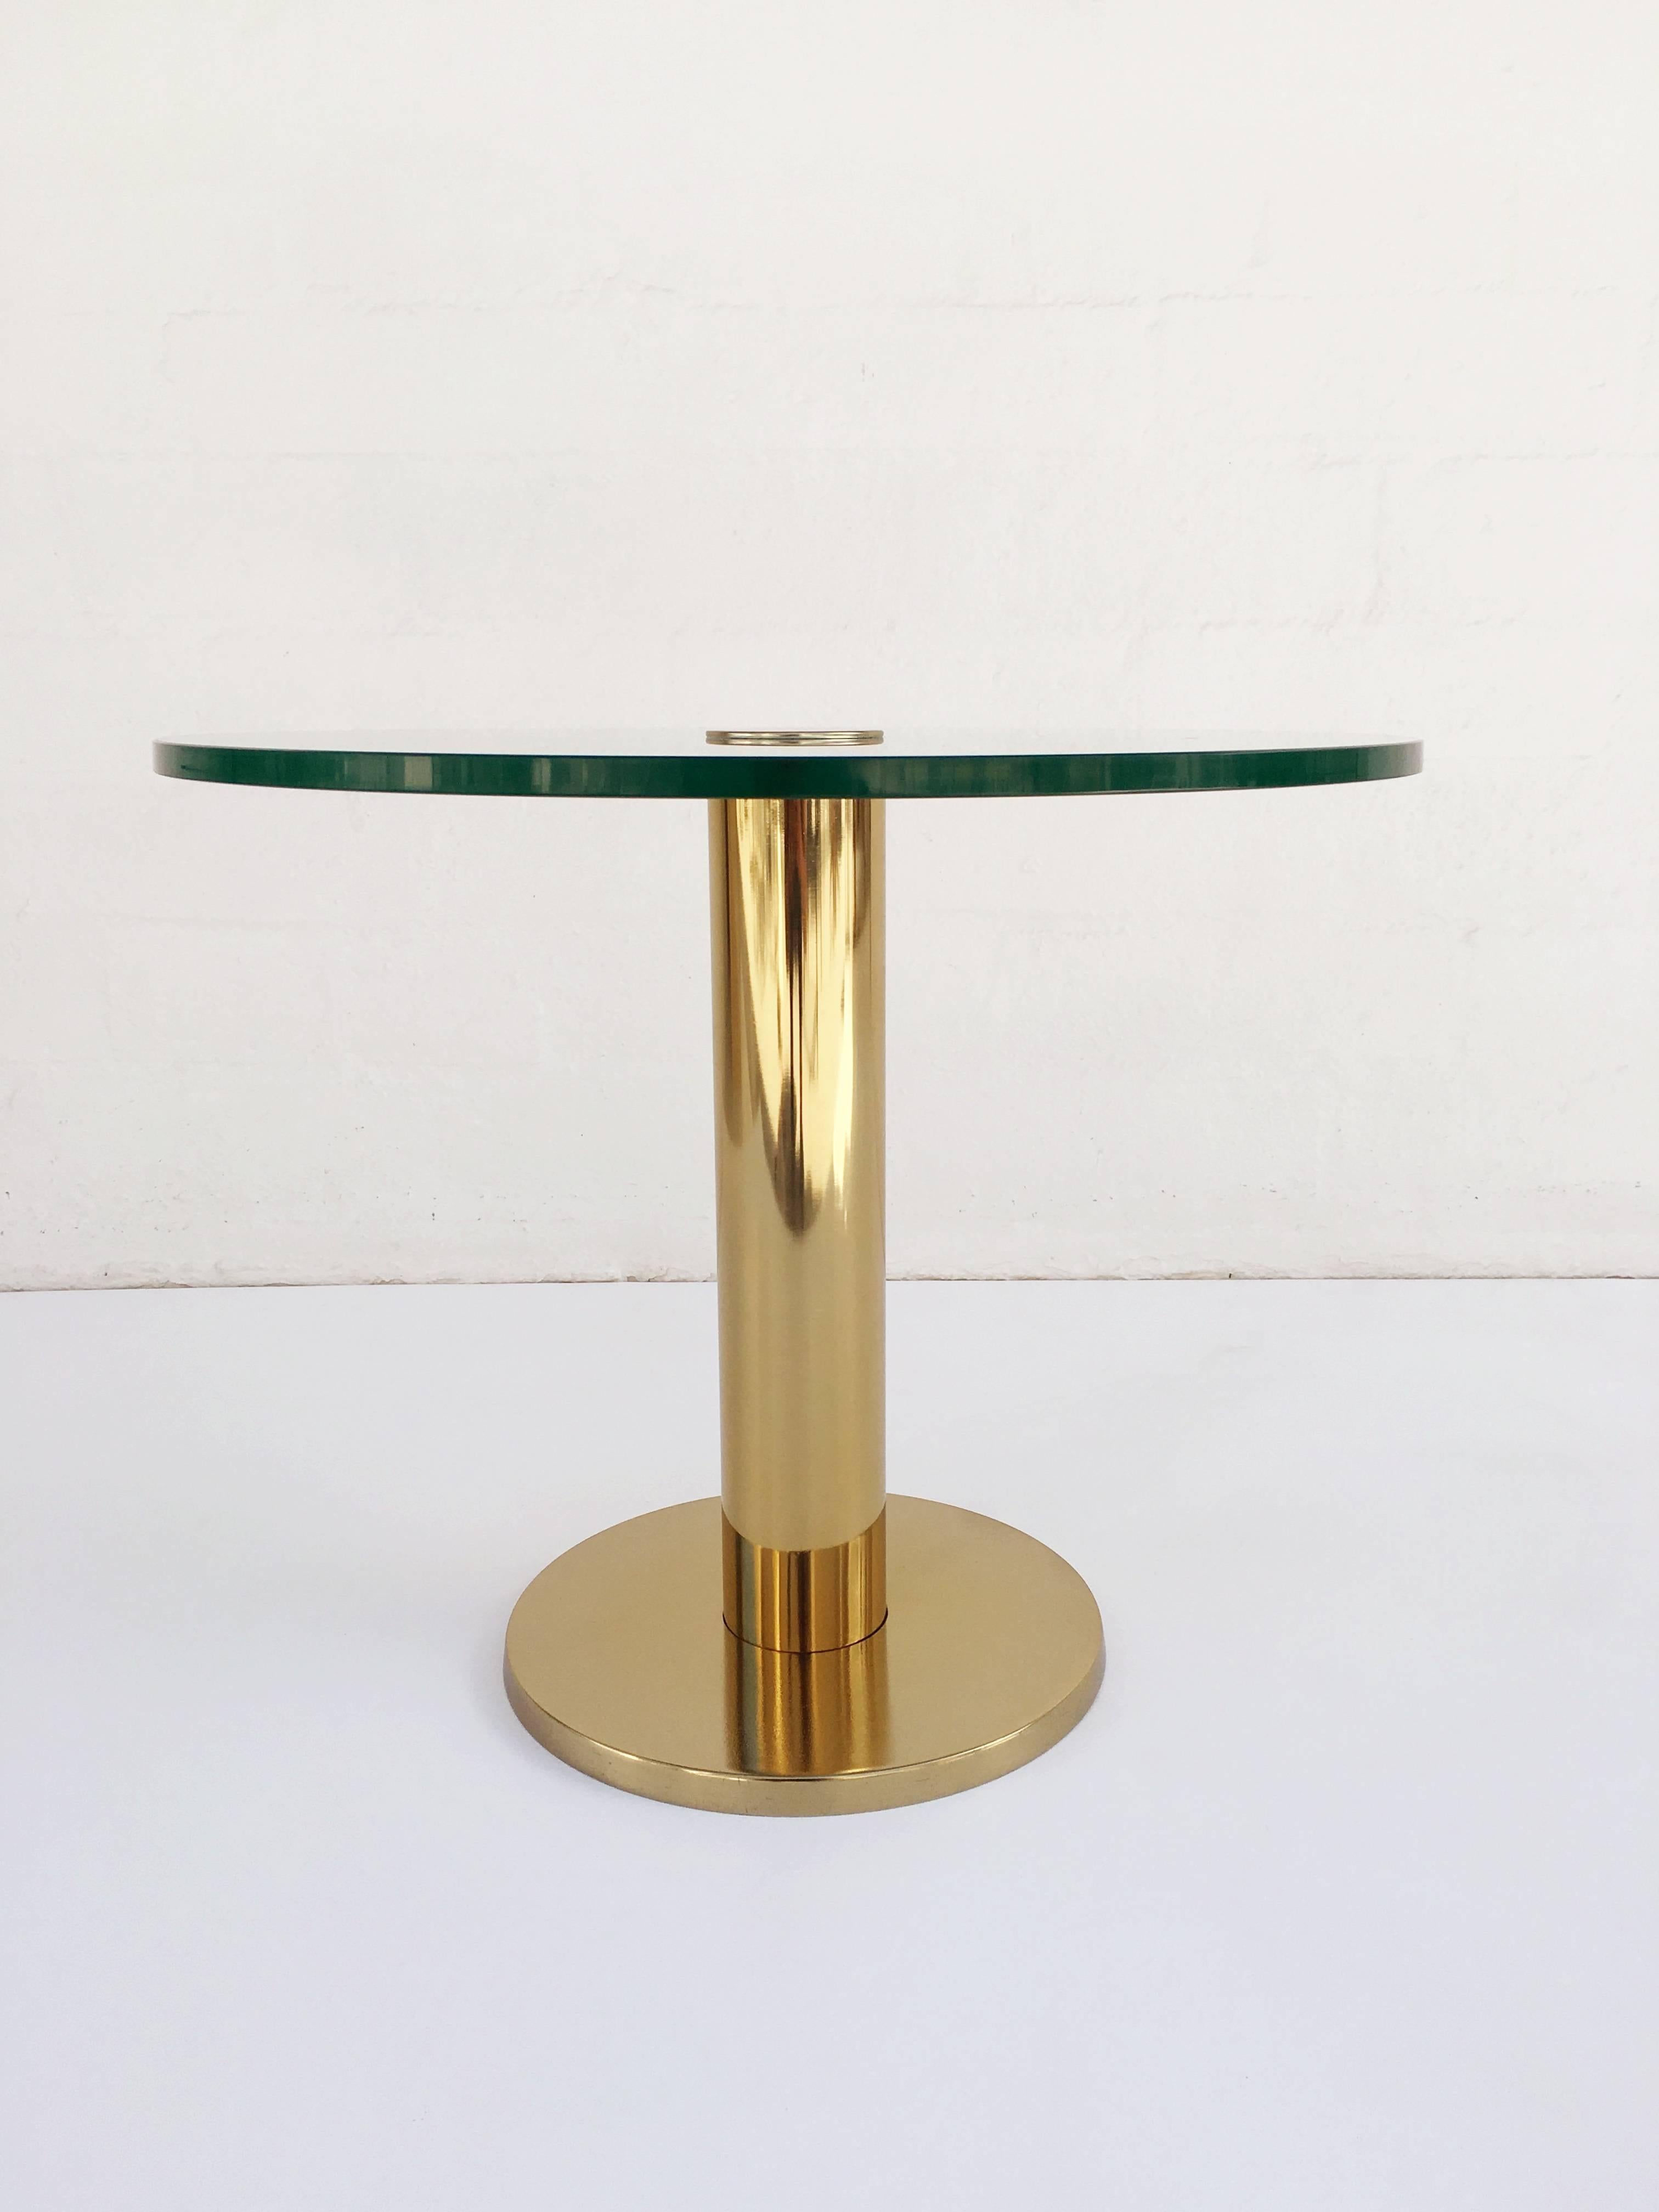 Side table made by Pace Collection, circa 1970s. 
This table consists of polished brass base with a 1/2